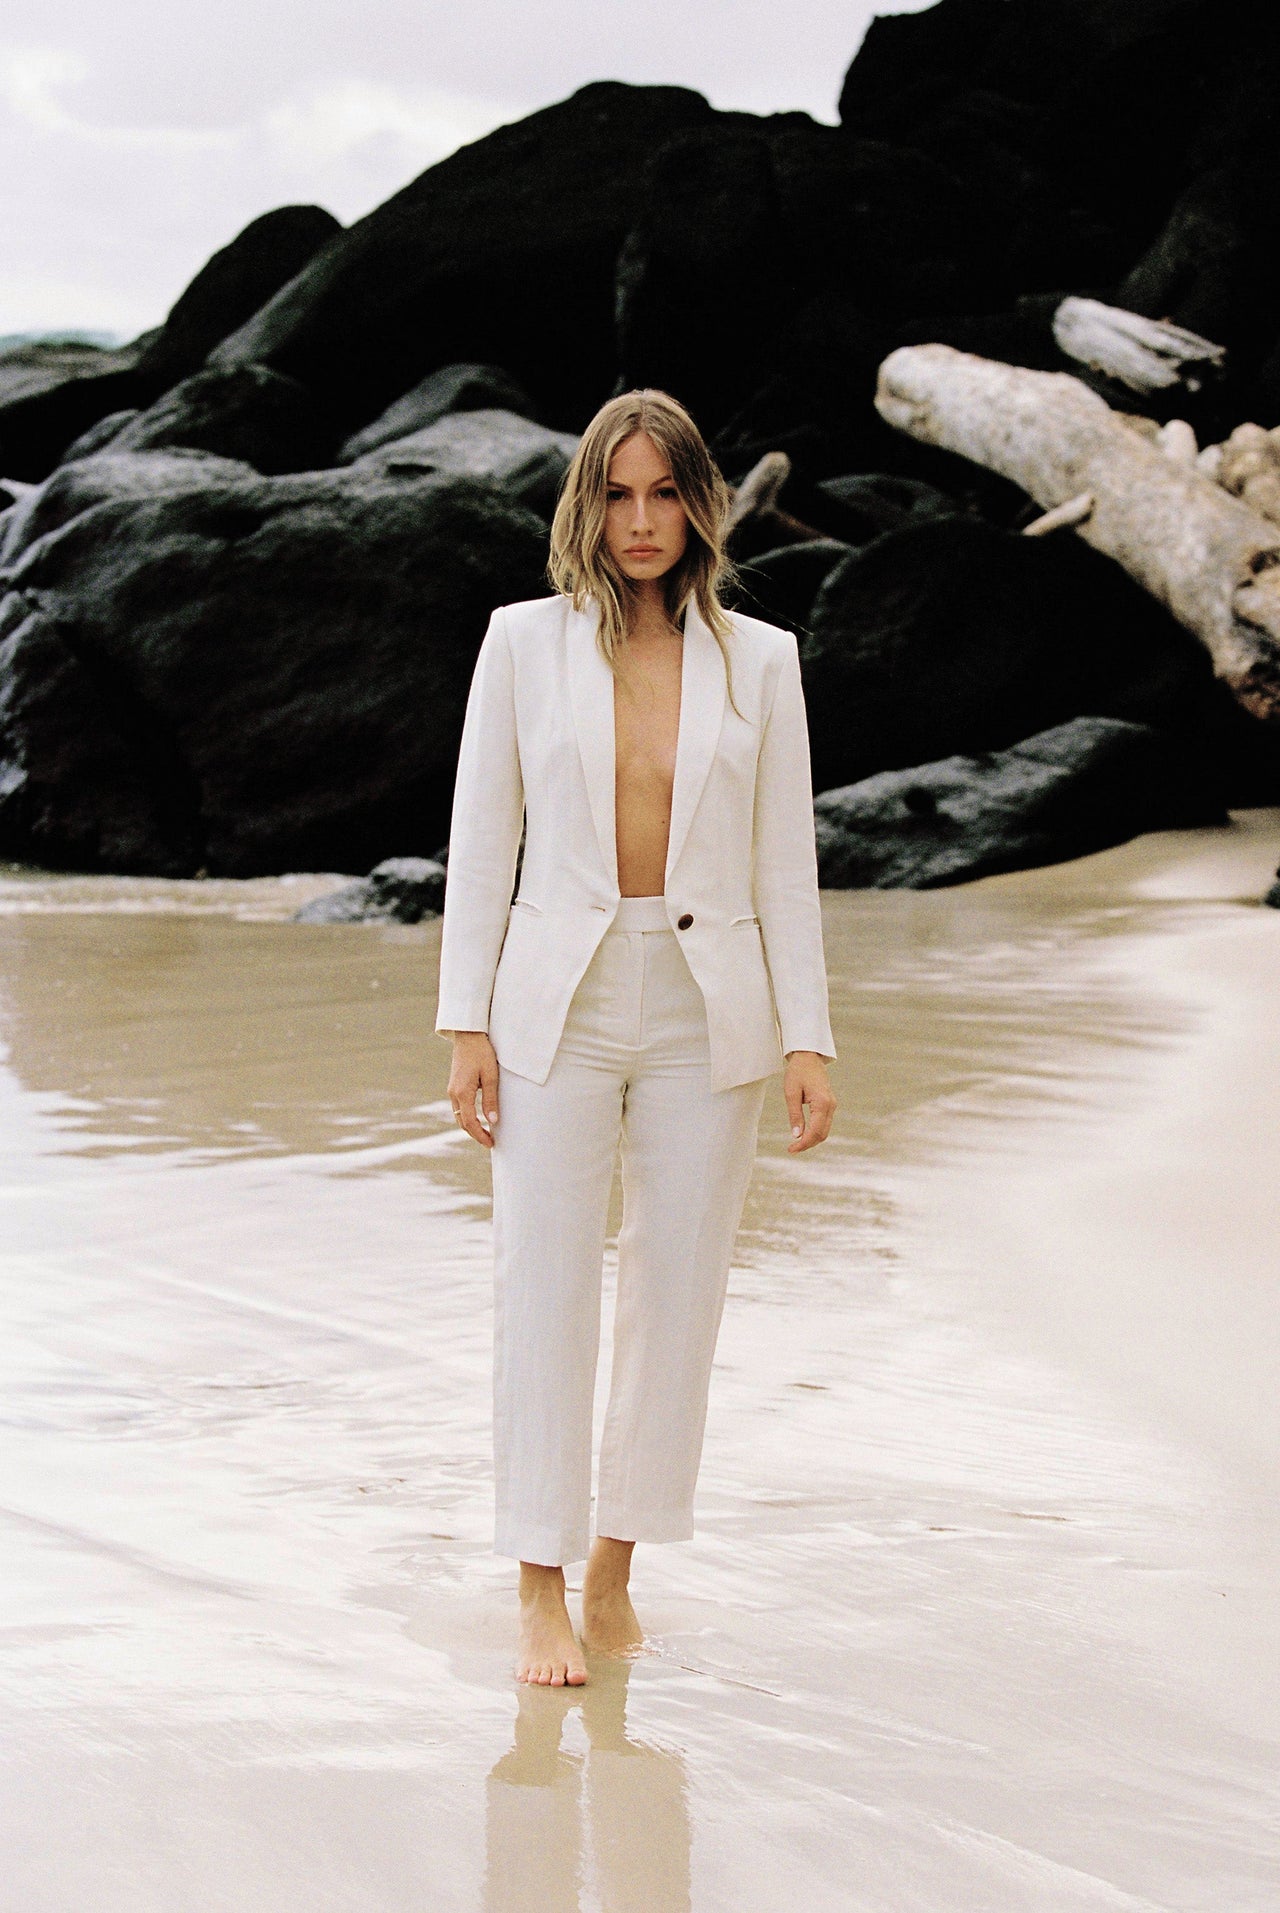 Model wearing white linen suit posing by the beach